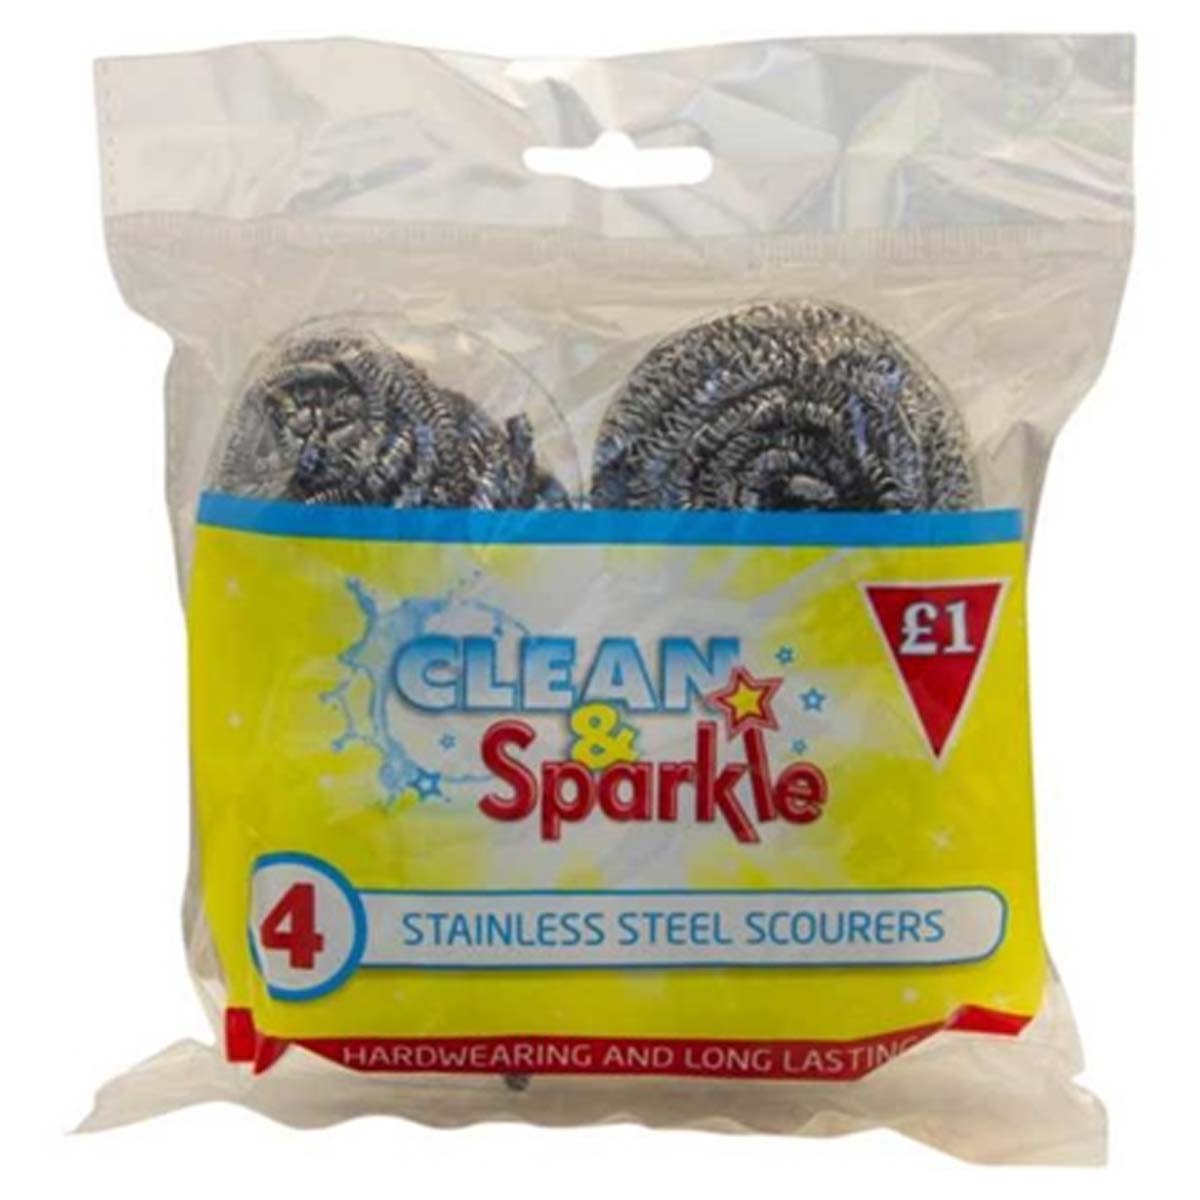 Clean & Sparkle - Stainless Steel Scourers - 4pcs - Continental Food Store